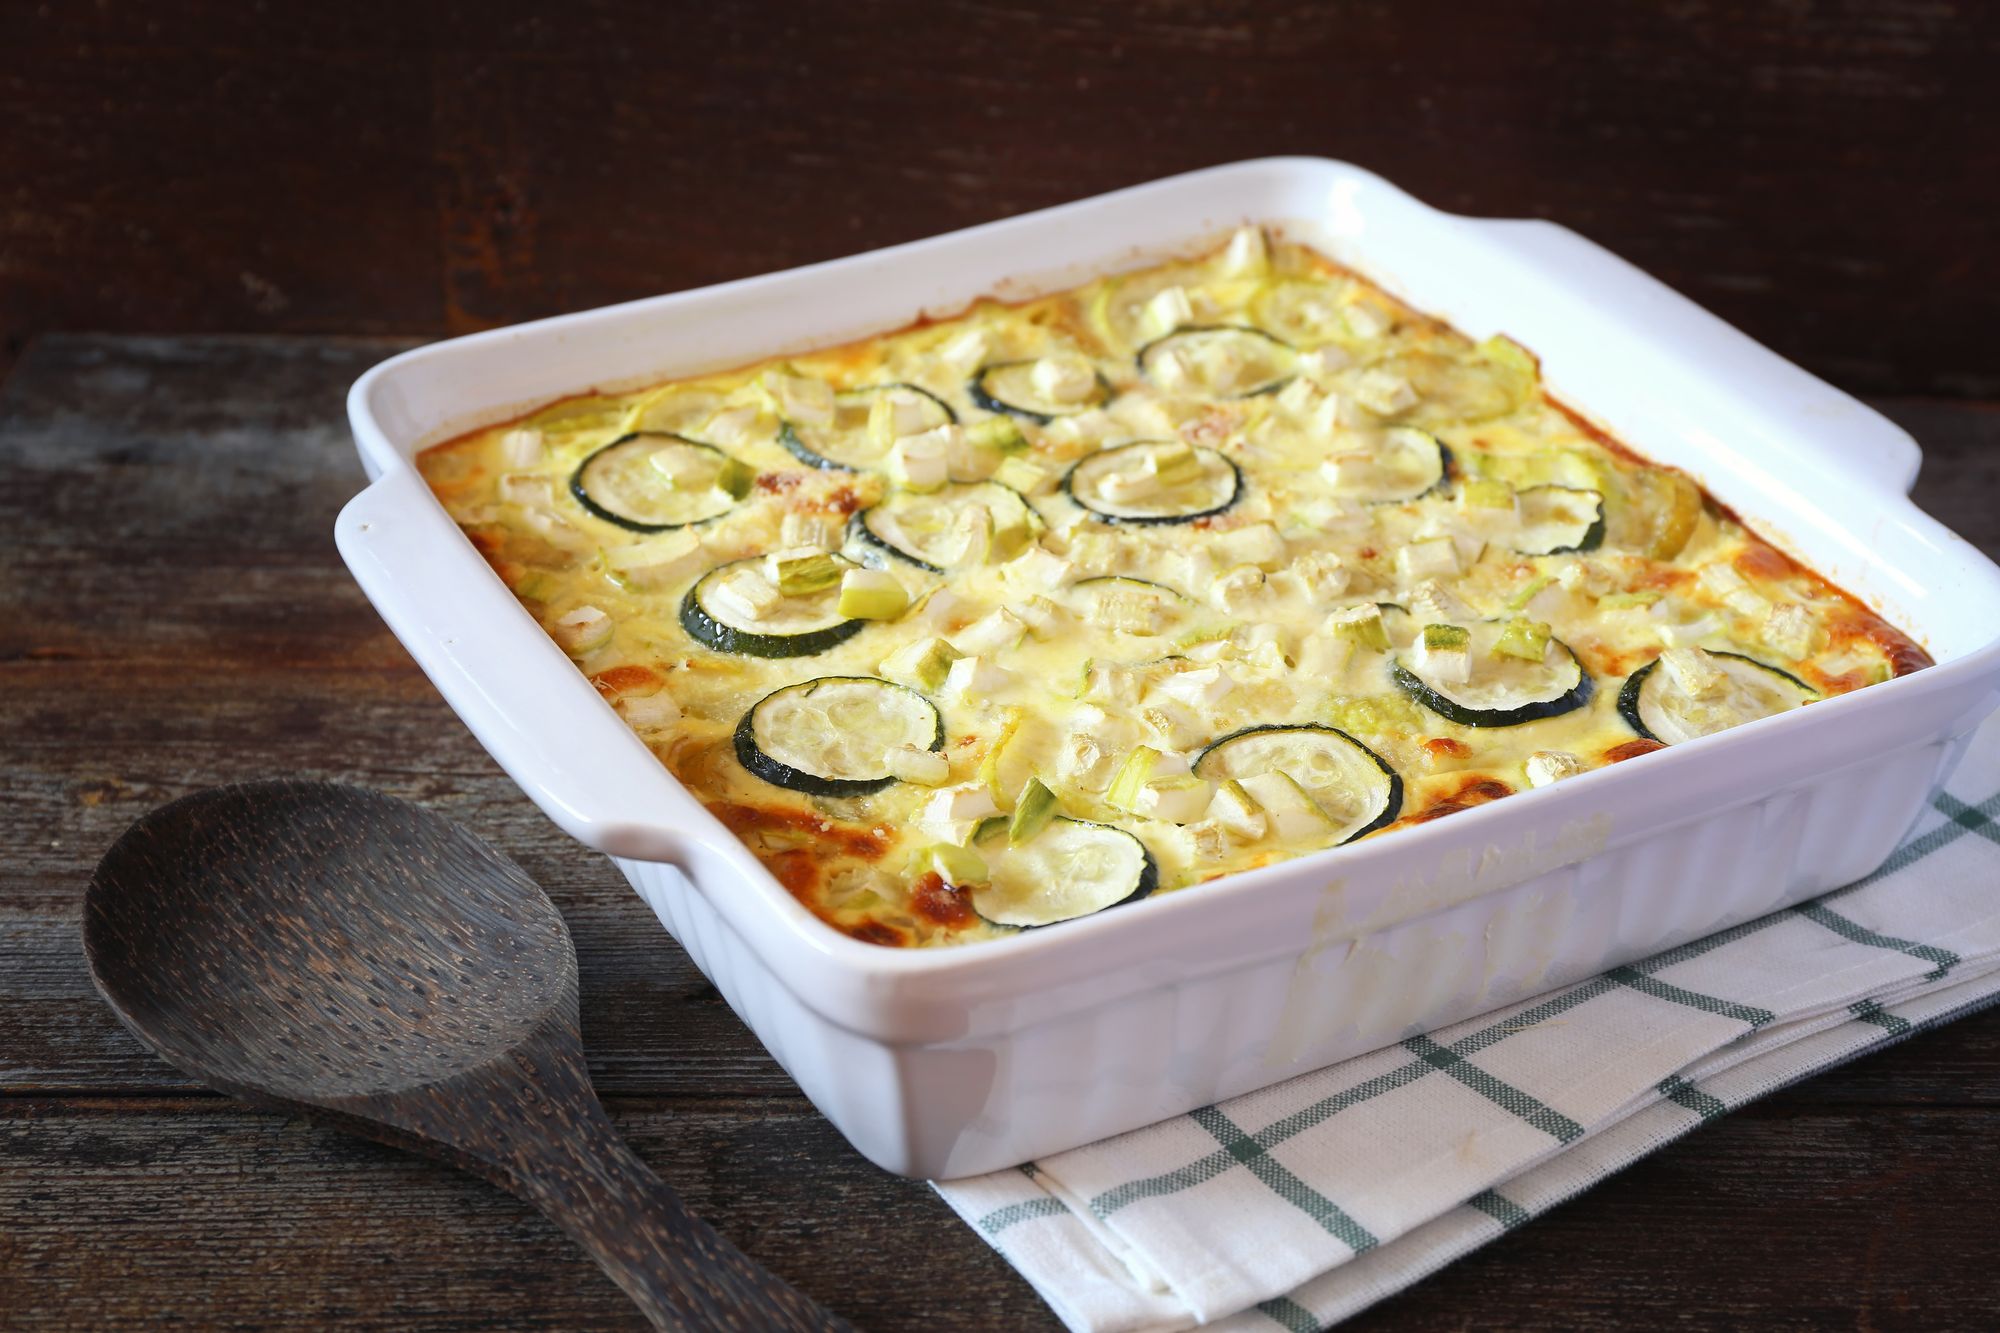 Feta and Courgette Bake